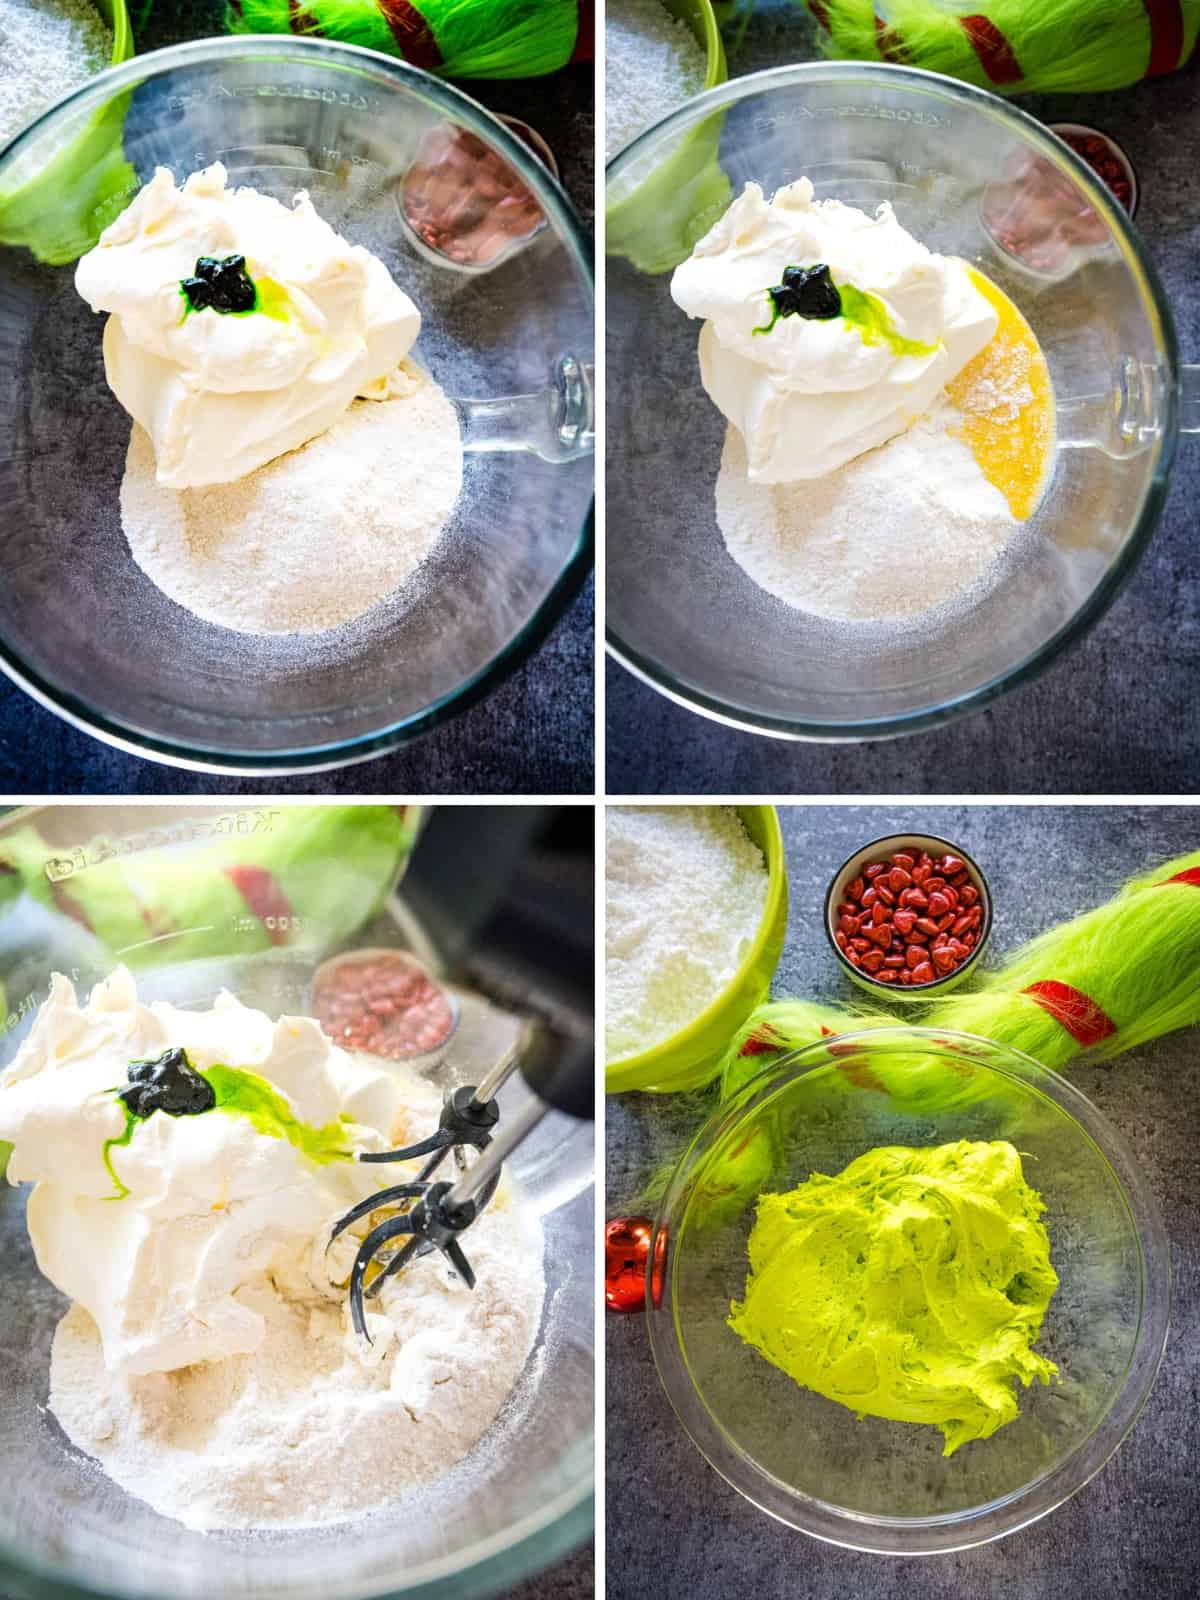 Collage image showing steps to make grinch cookie dough.